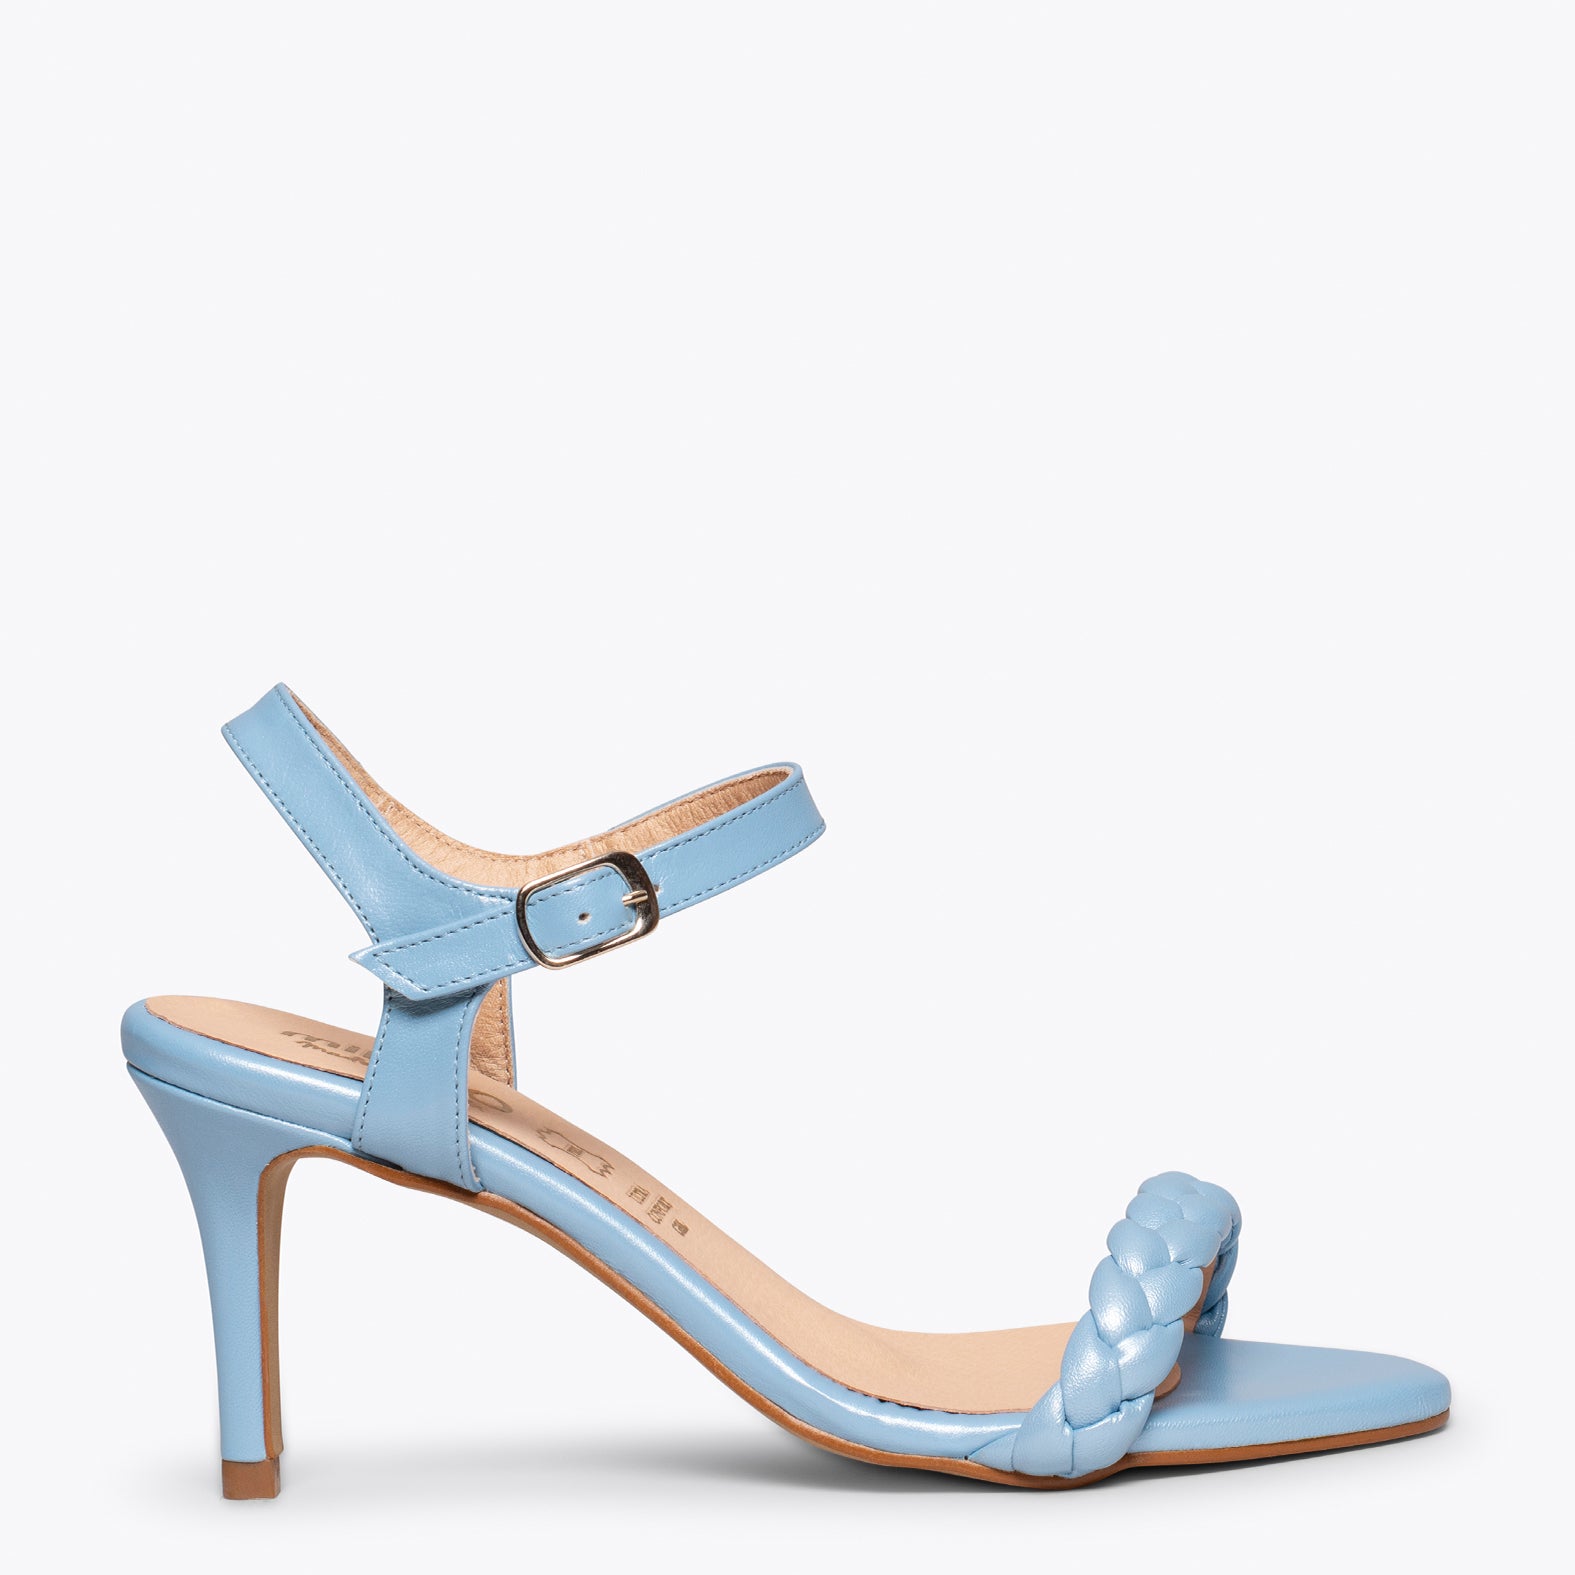 SUNSET – BABY BLUE elegant sandals with a braided strap